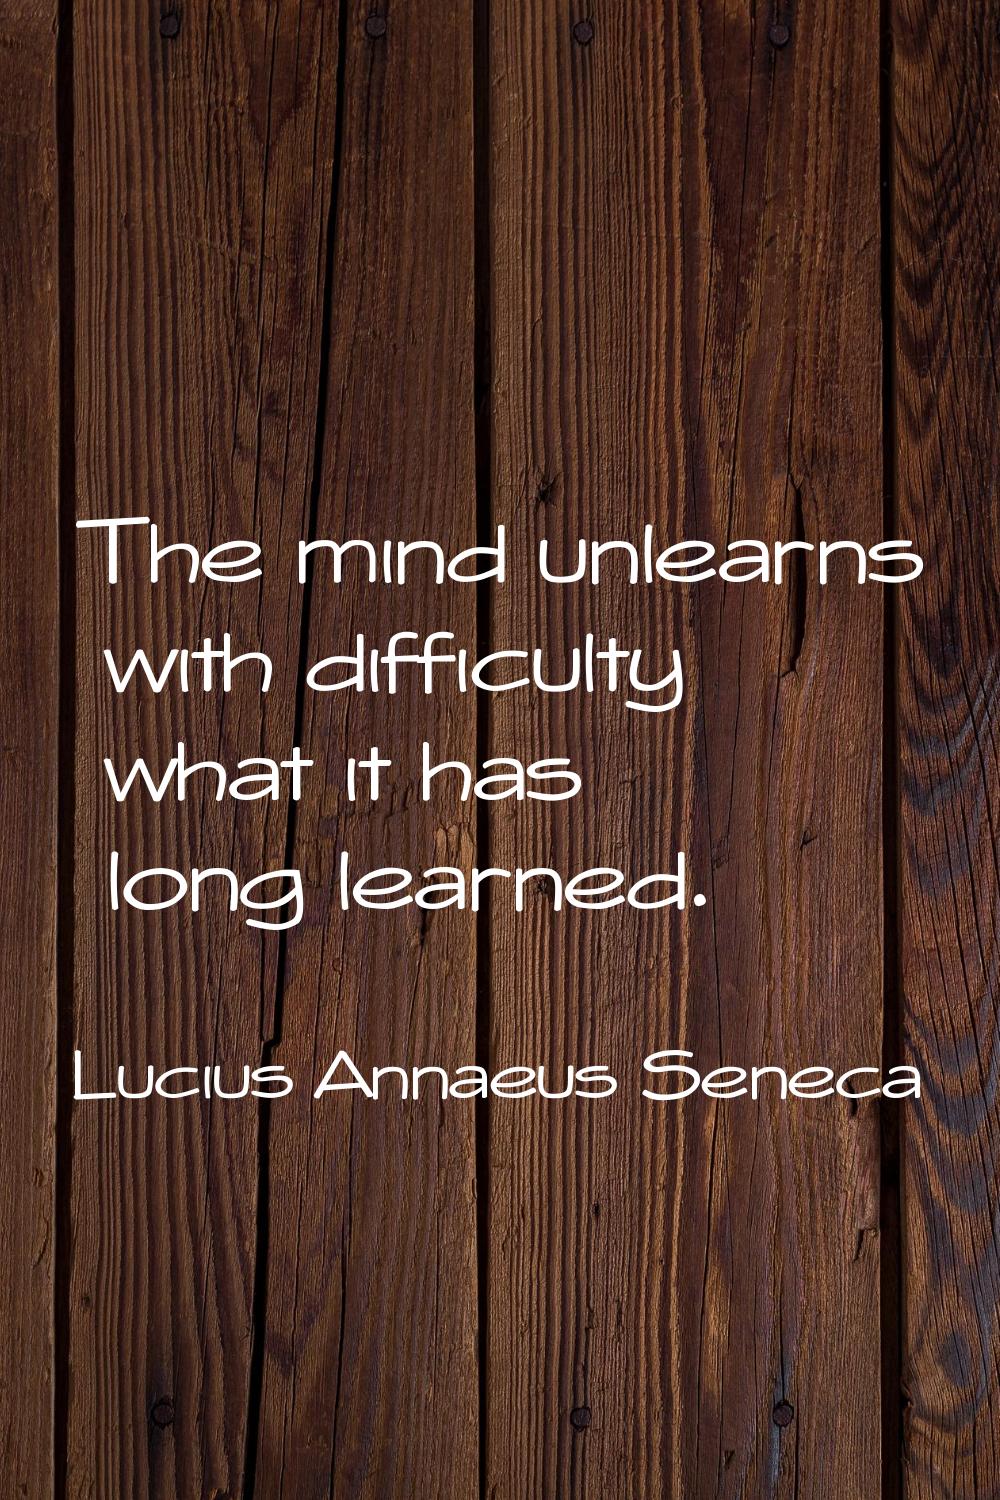 The mind unlearns with difficulty what it has long learned.